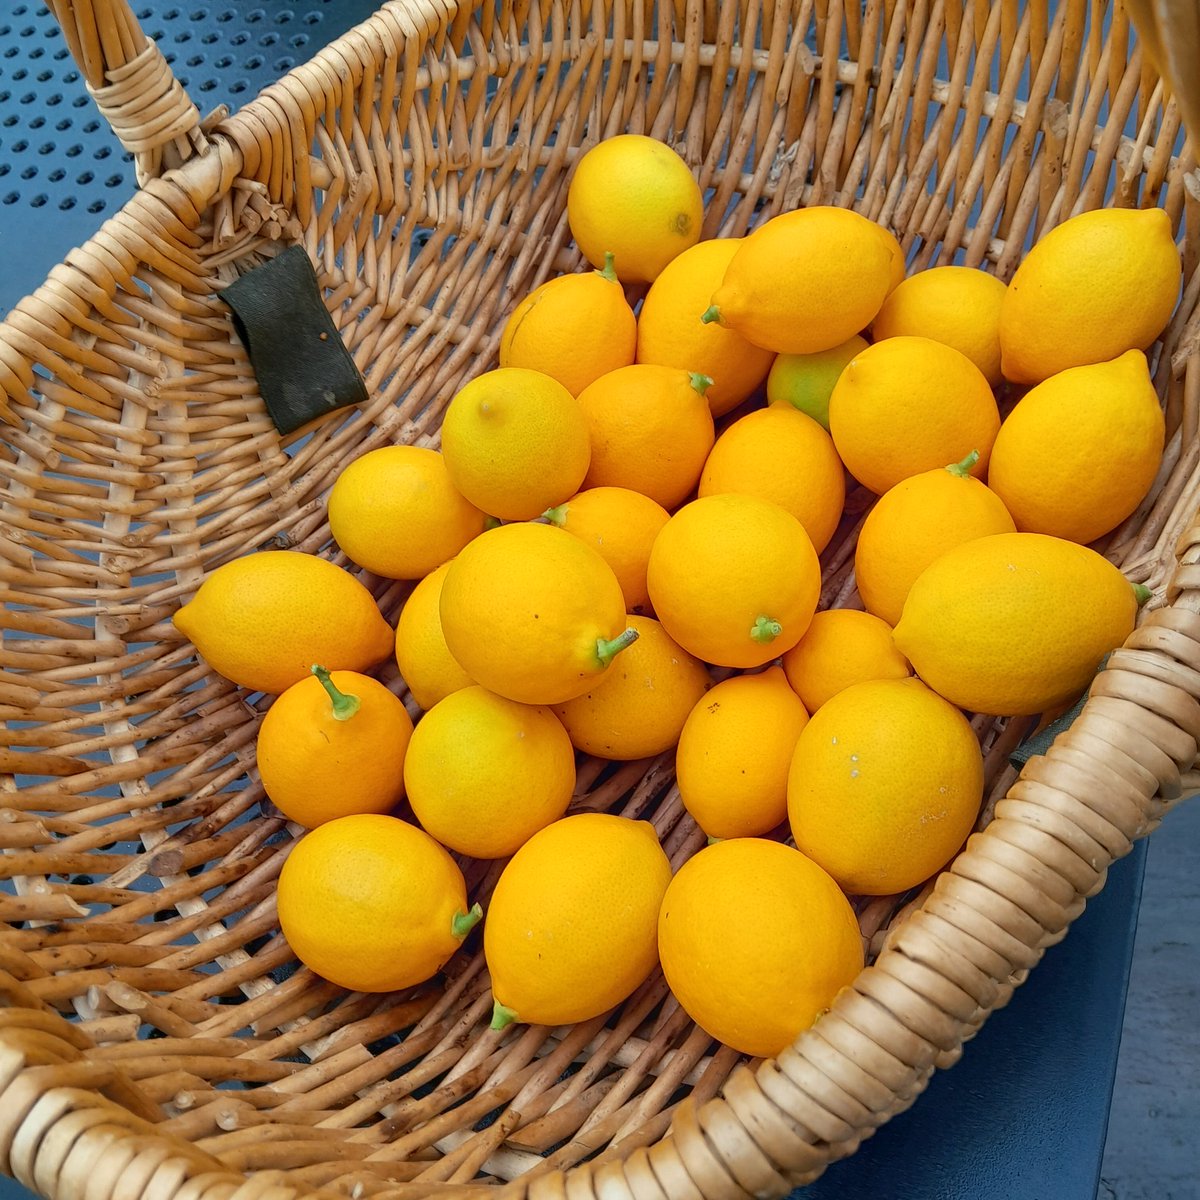 Homegrown lemon harvest. I am very pleased with this! #growyourown